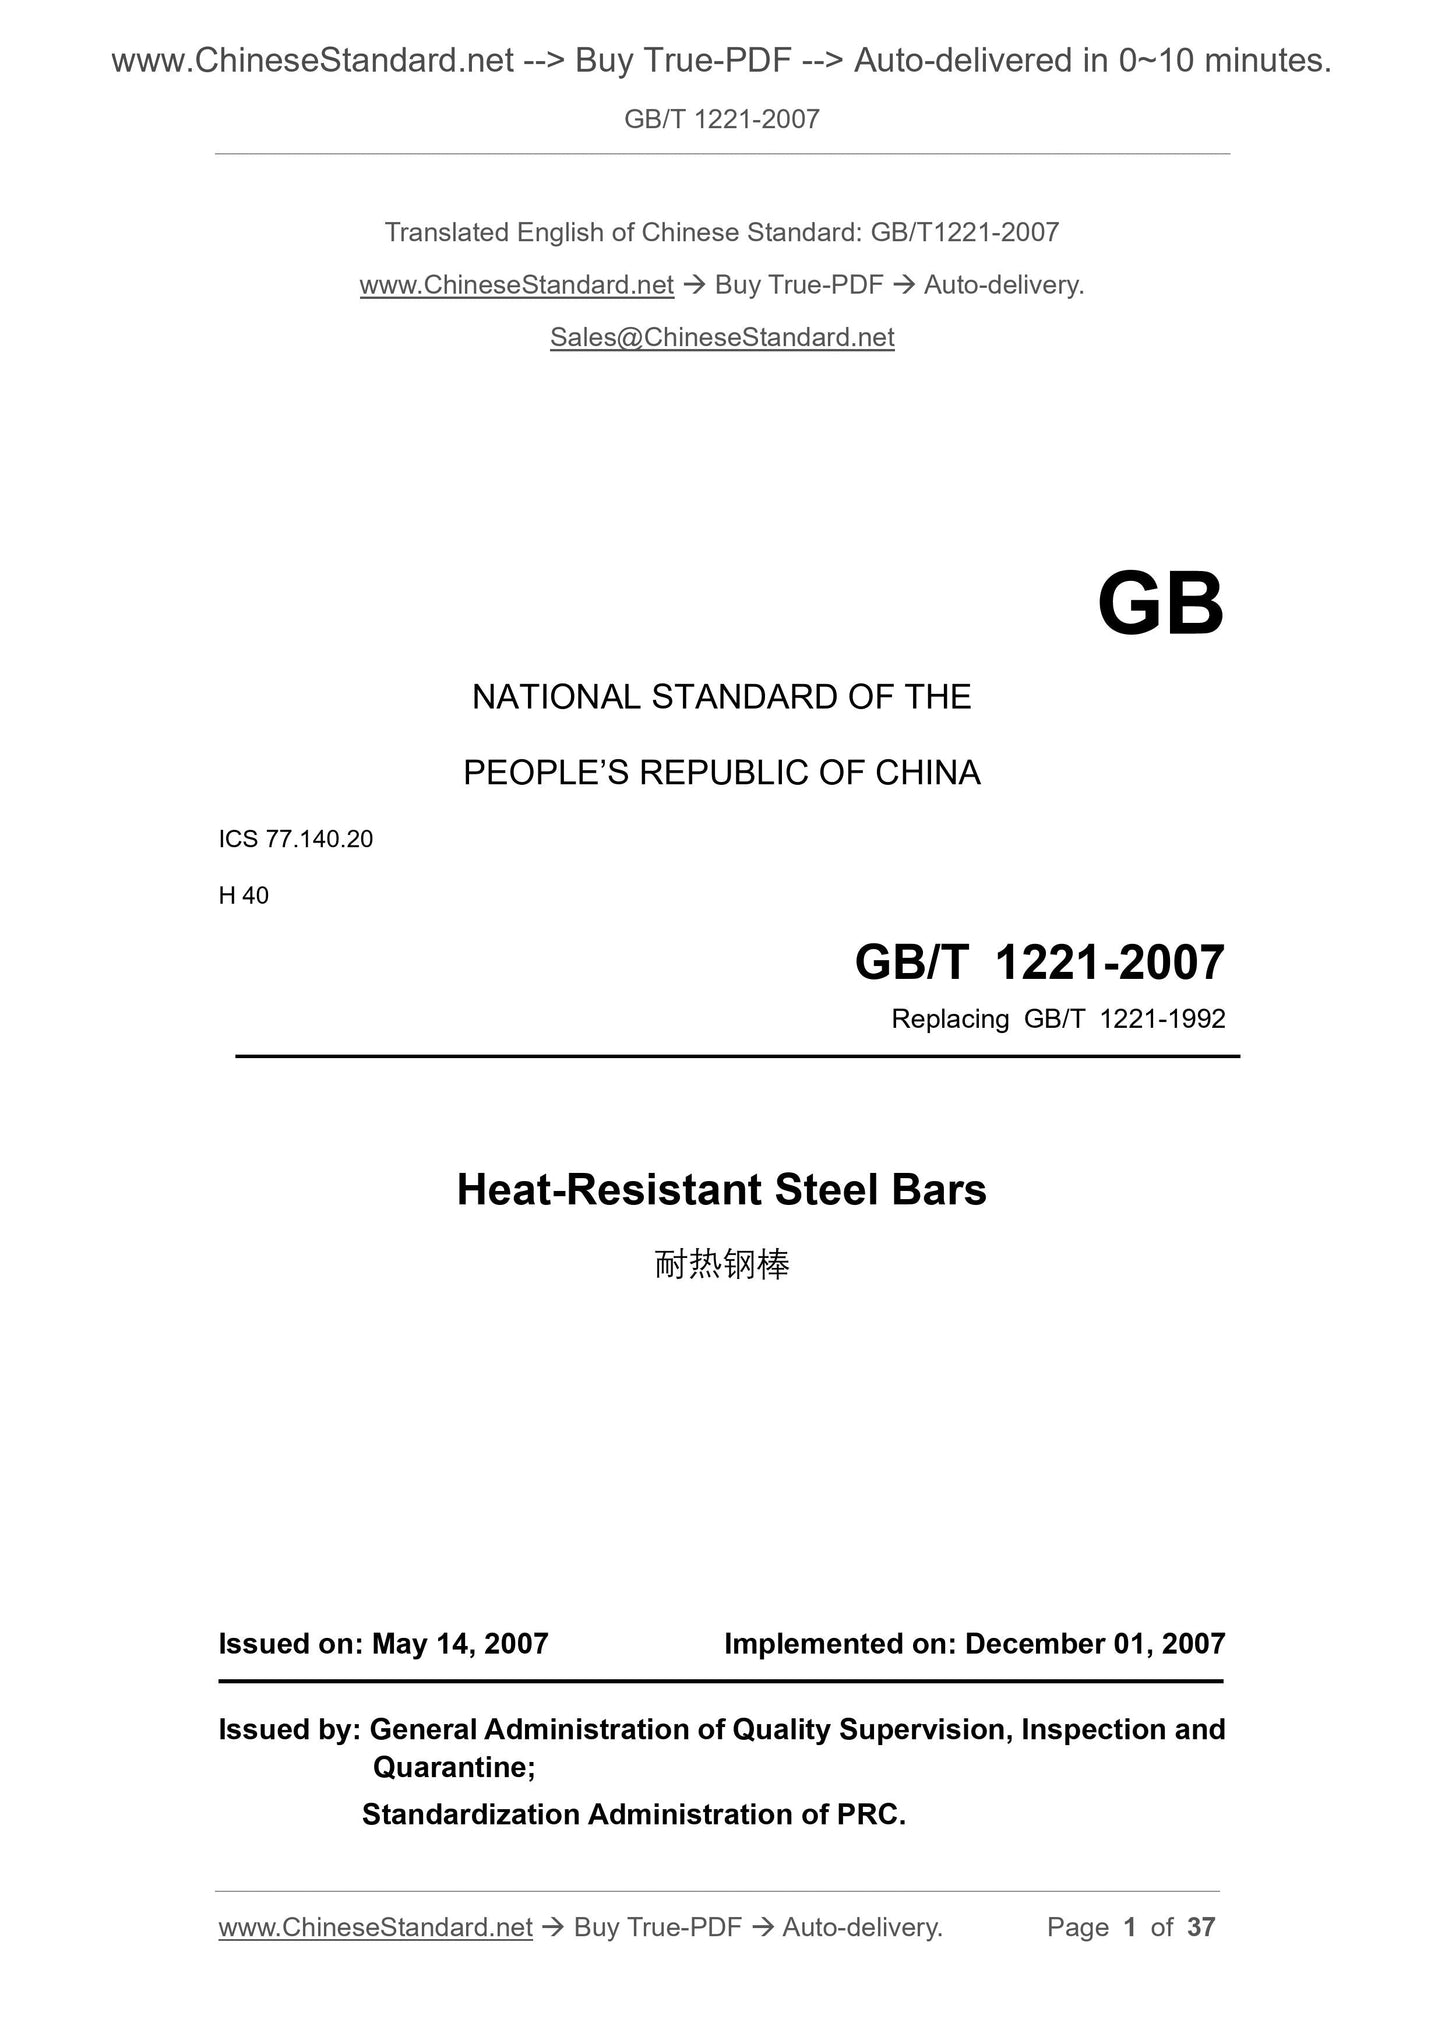 GB/T 1221-2007 Page 1